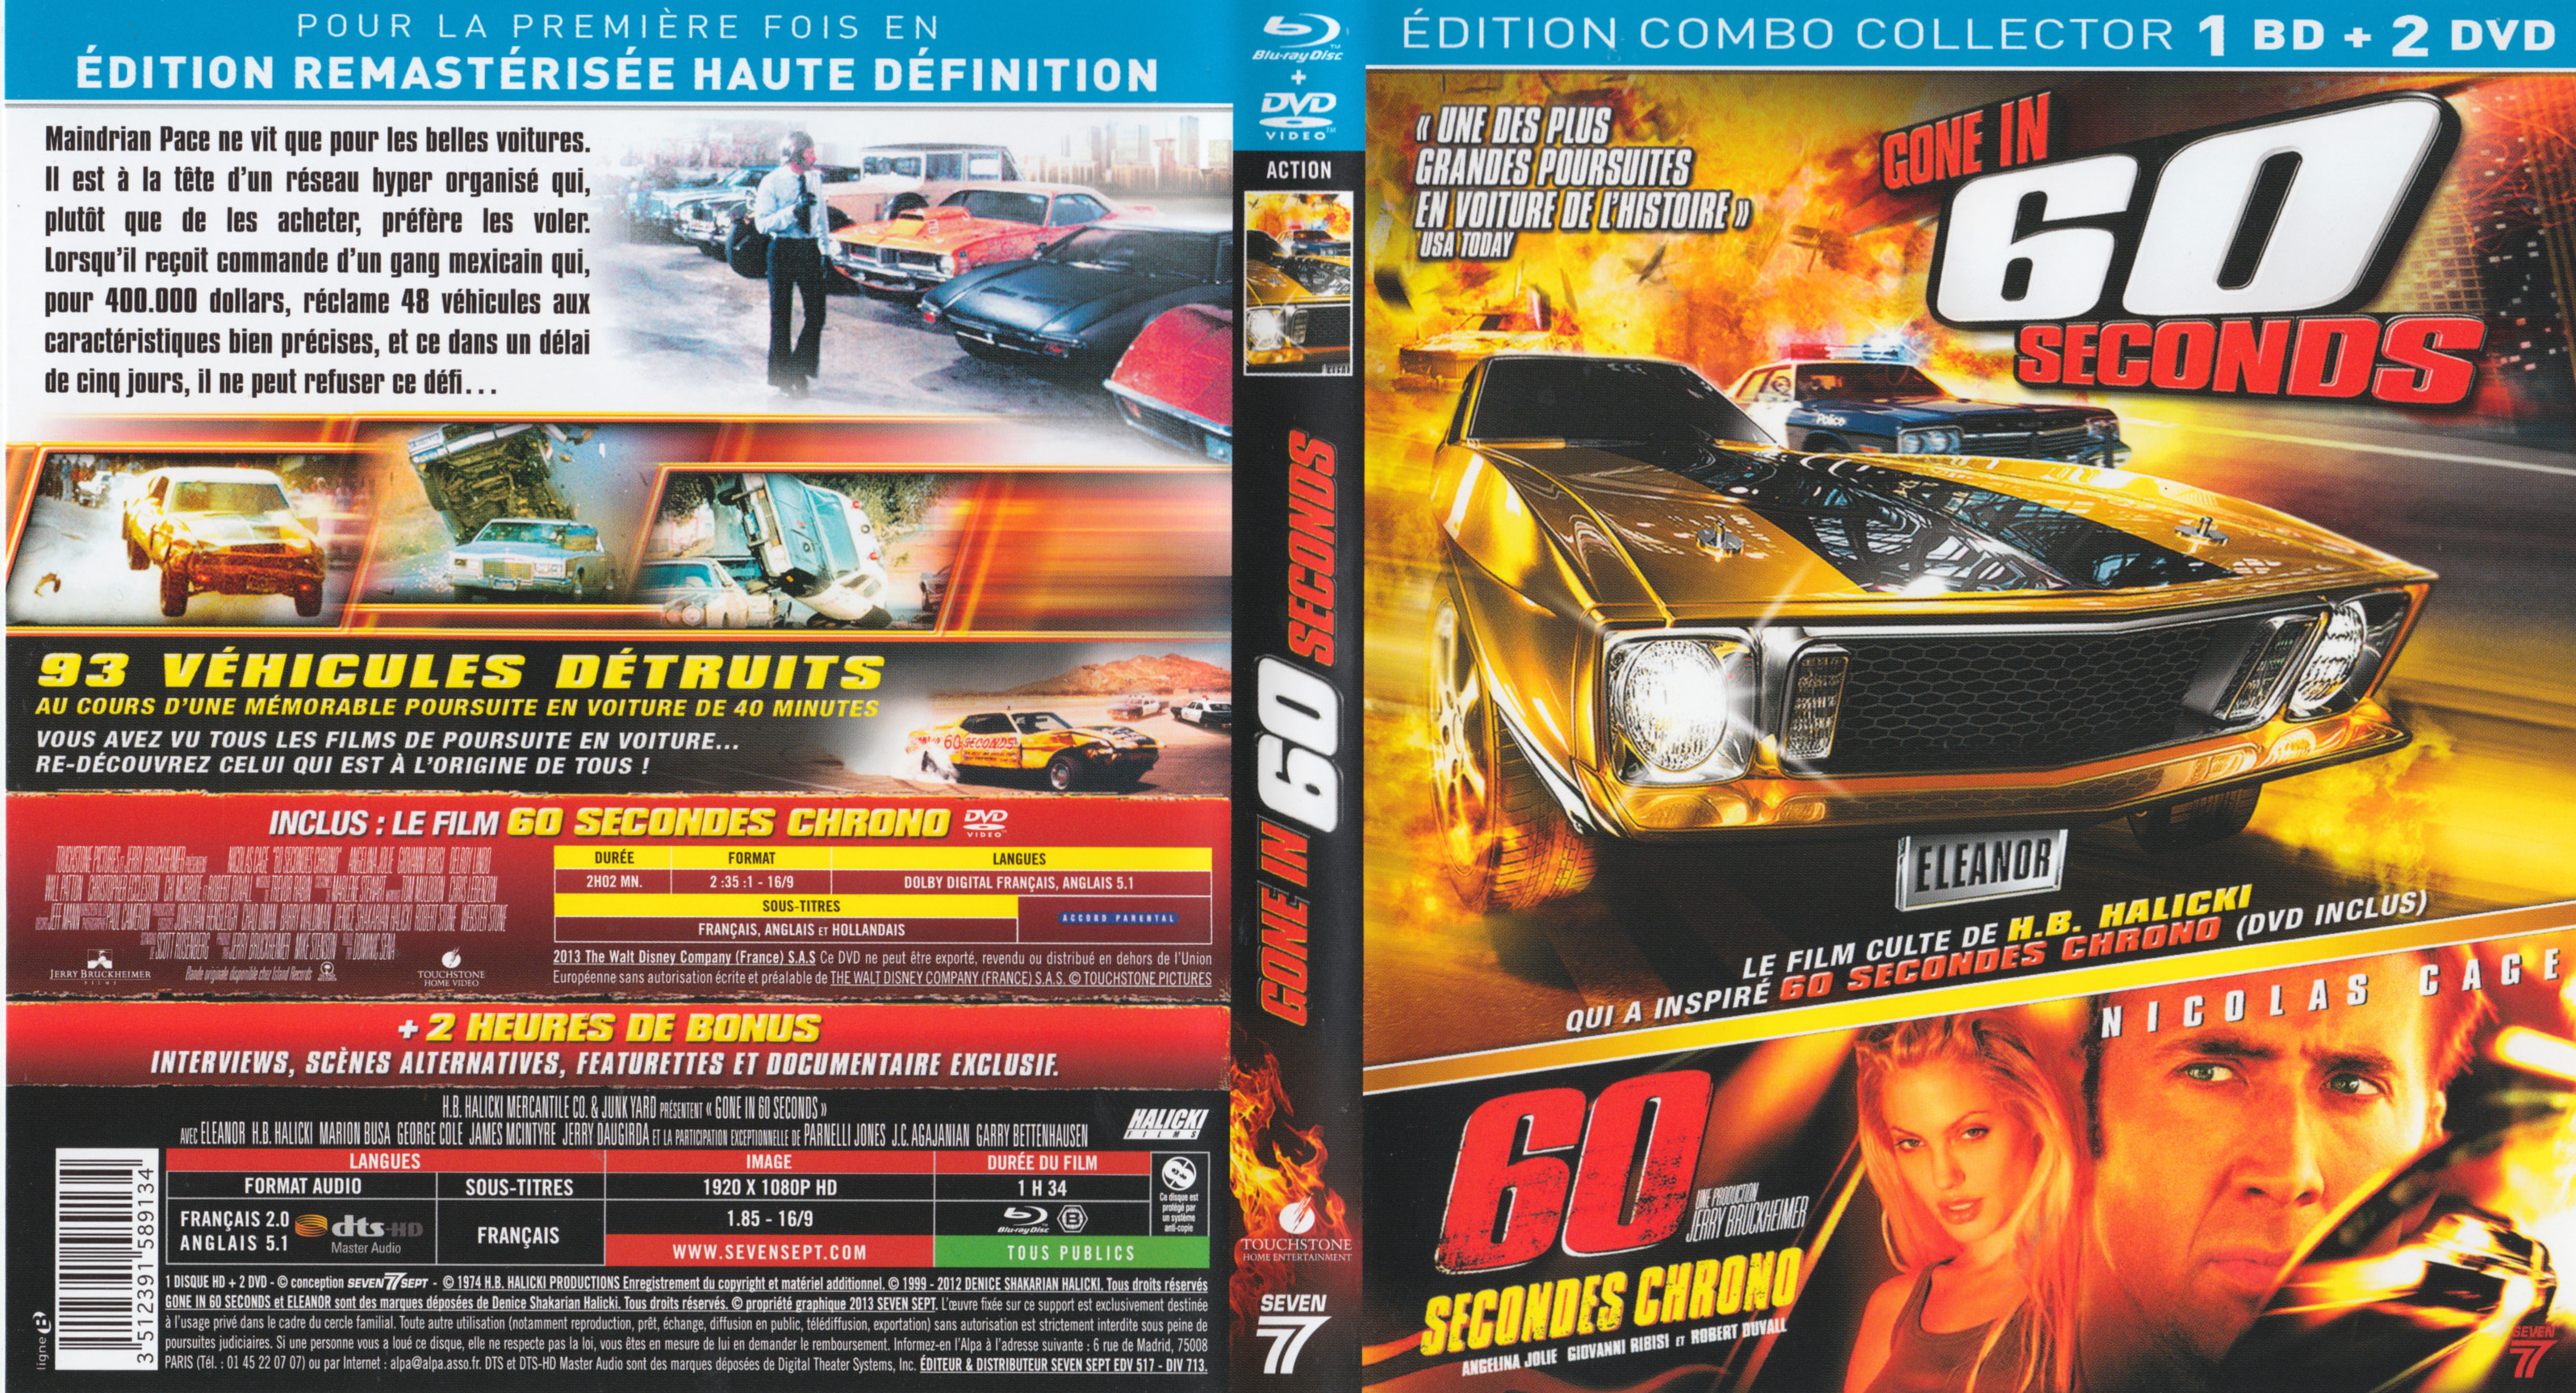 Jaquette DVD 60 secondes chrono (BLU-RAY) v2